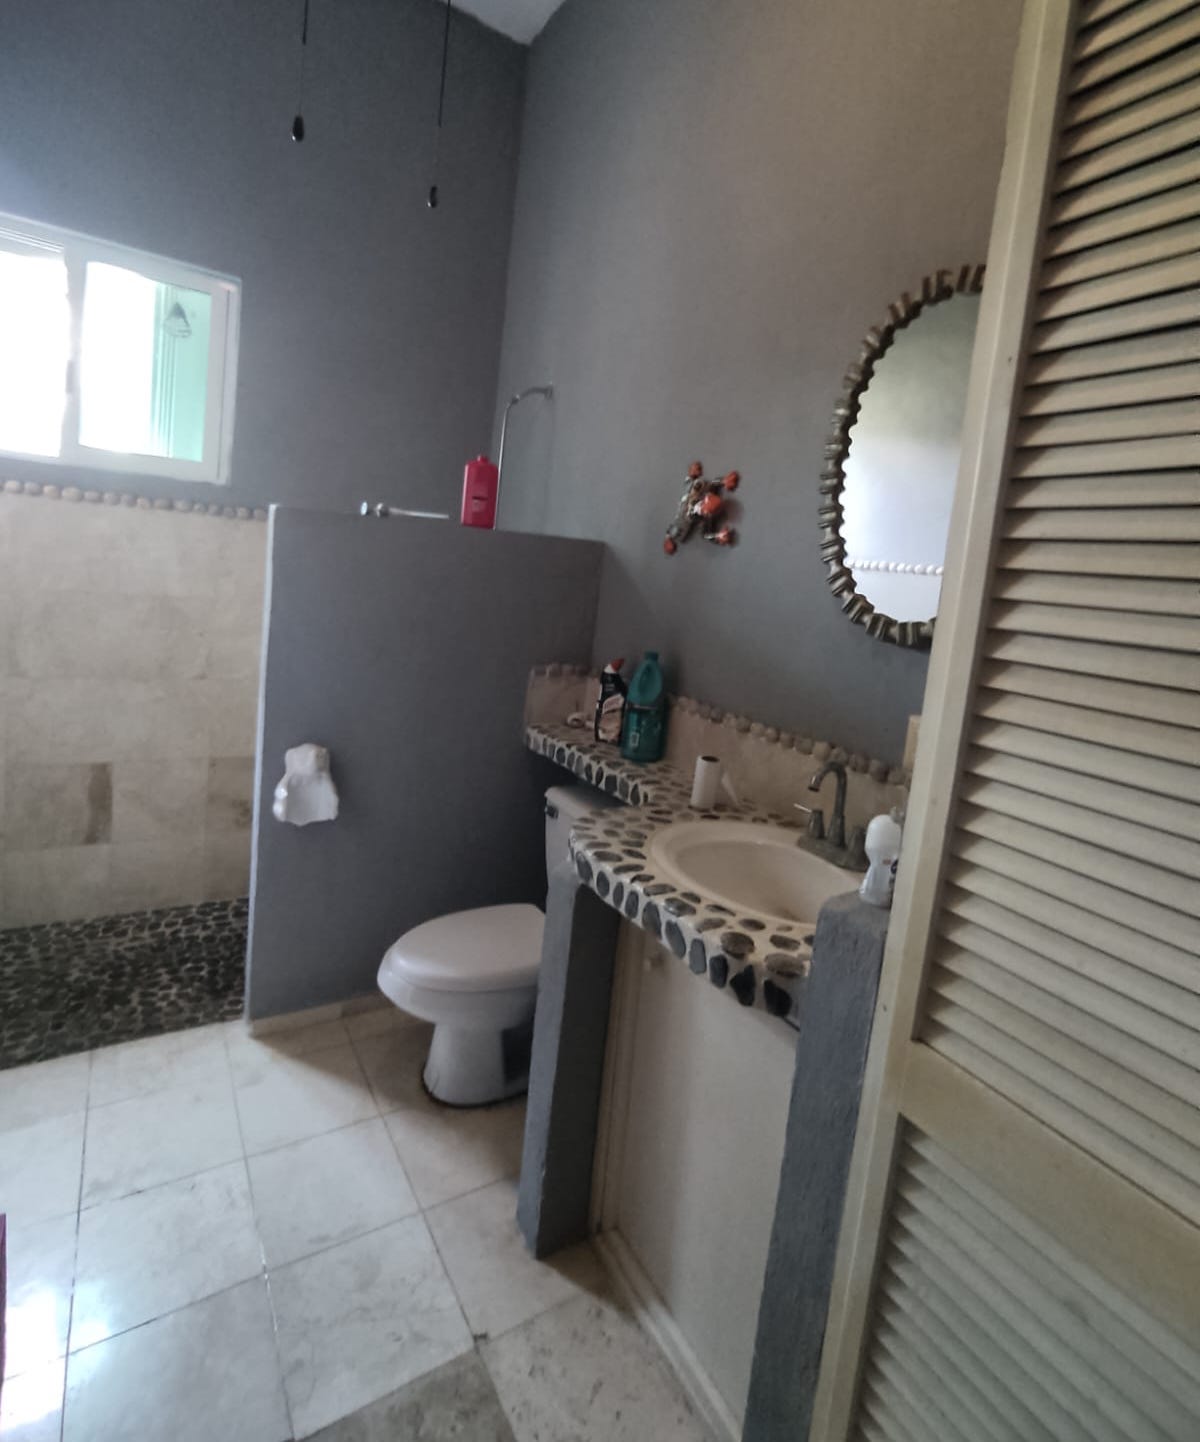 House in Alegranza with clubhouse, pool, games, courts, cenote, for sale